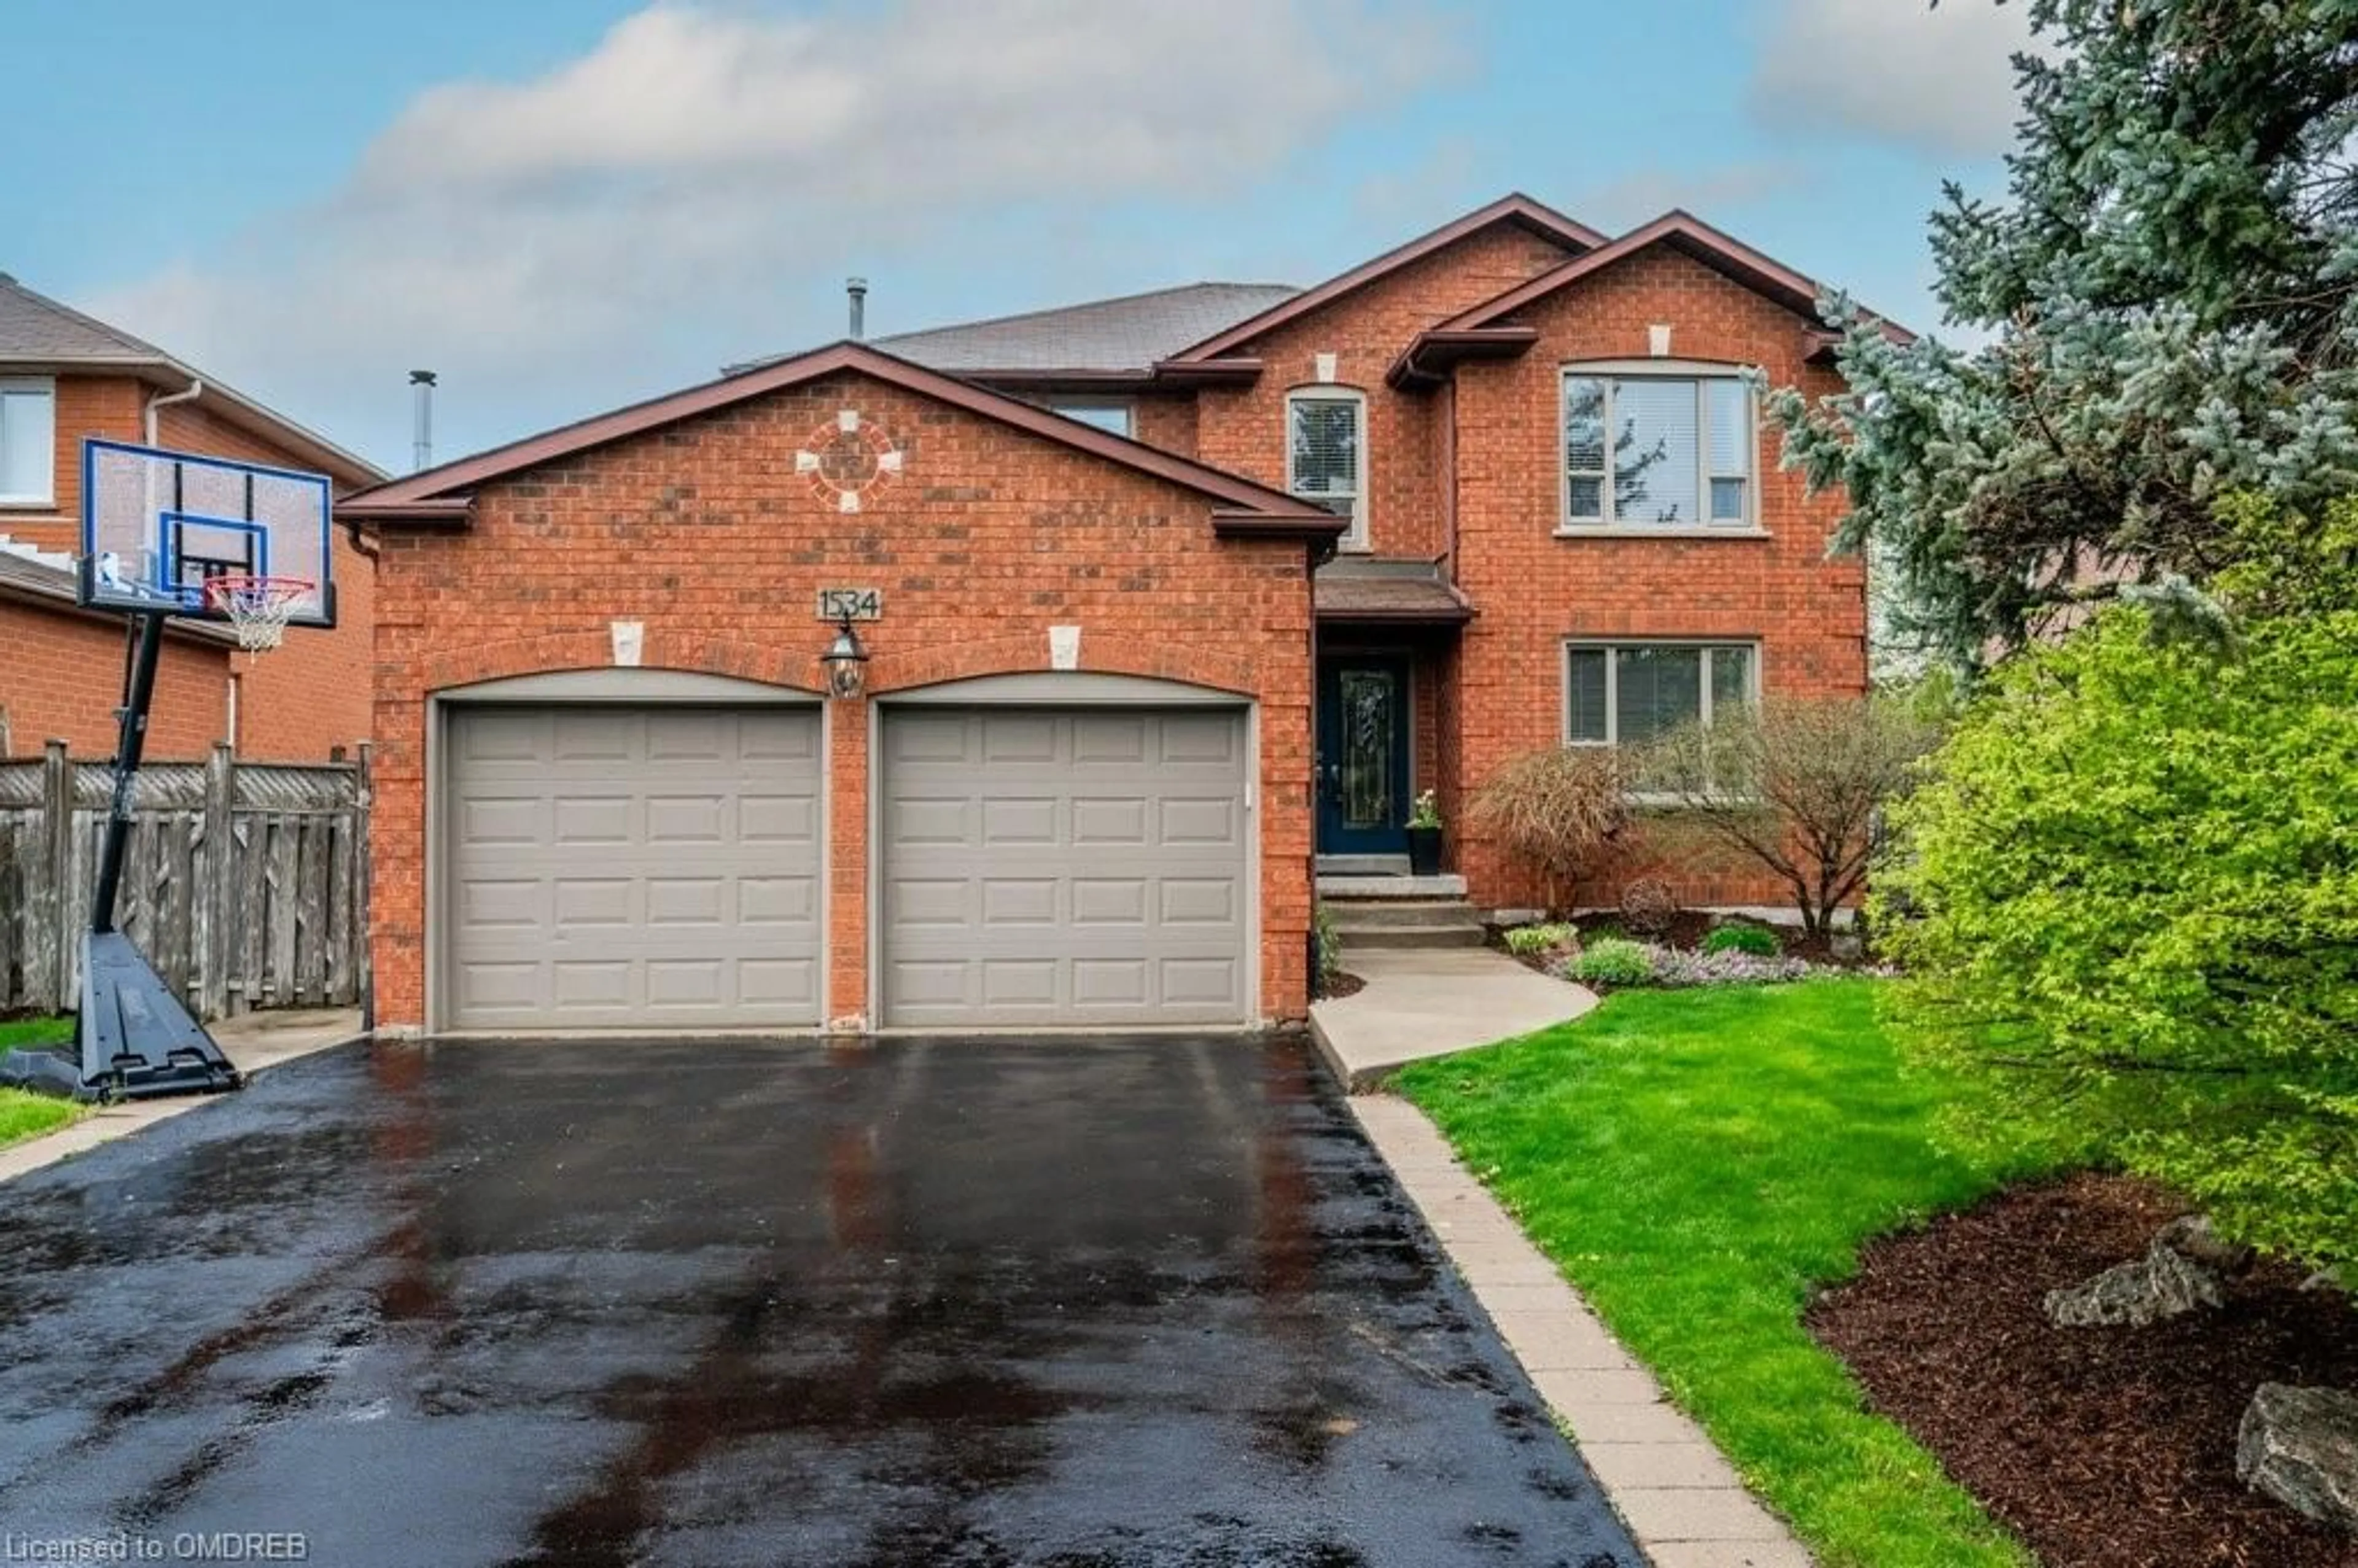 Home with brick exterior material for 1534 Heritage Way, Oakville Ontario L6M 2Z7